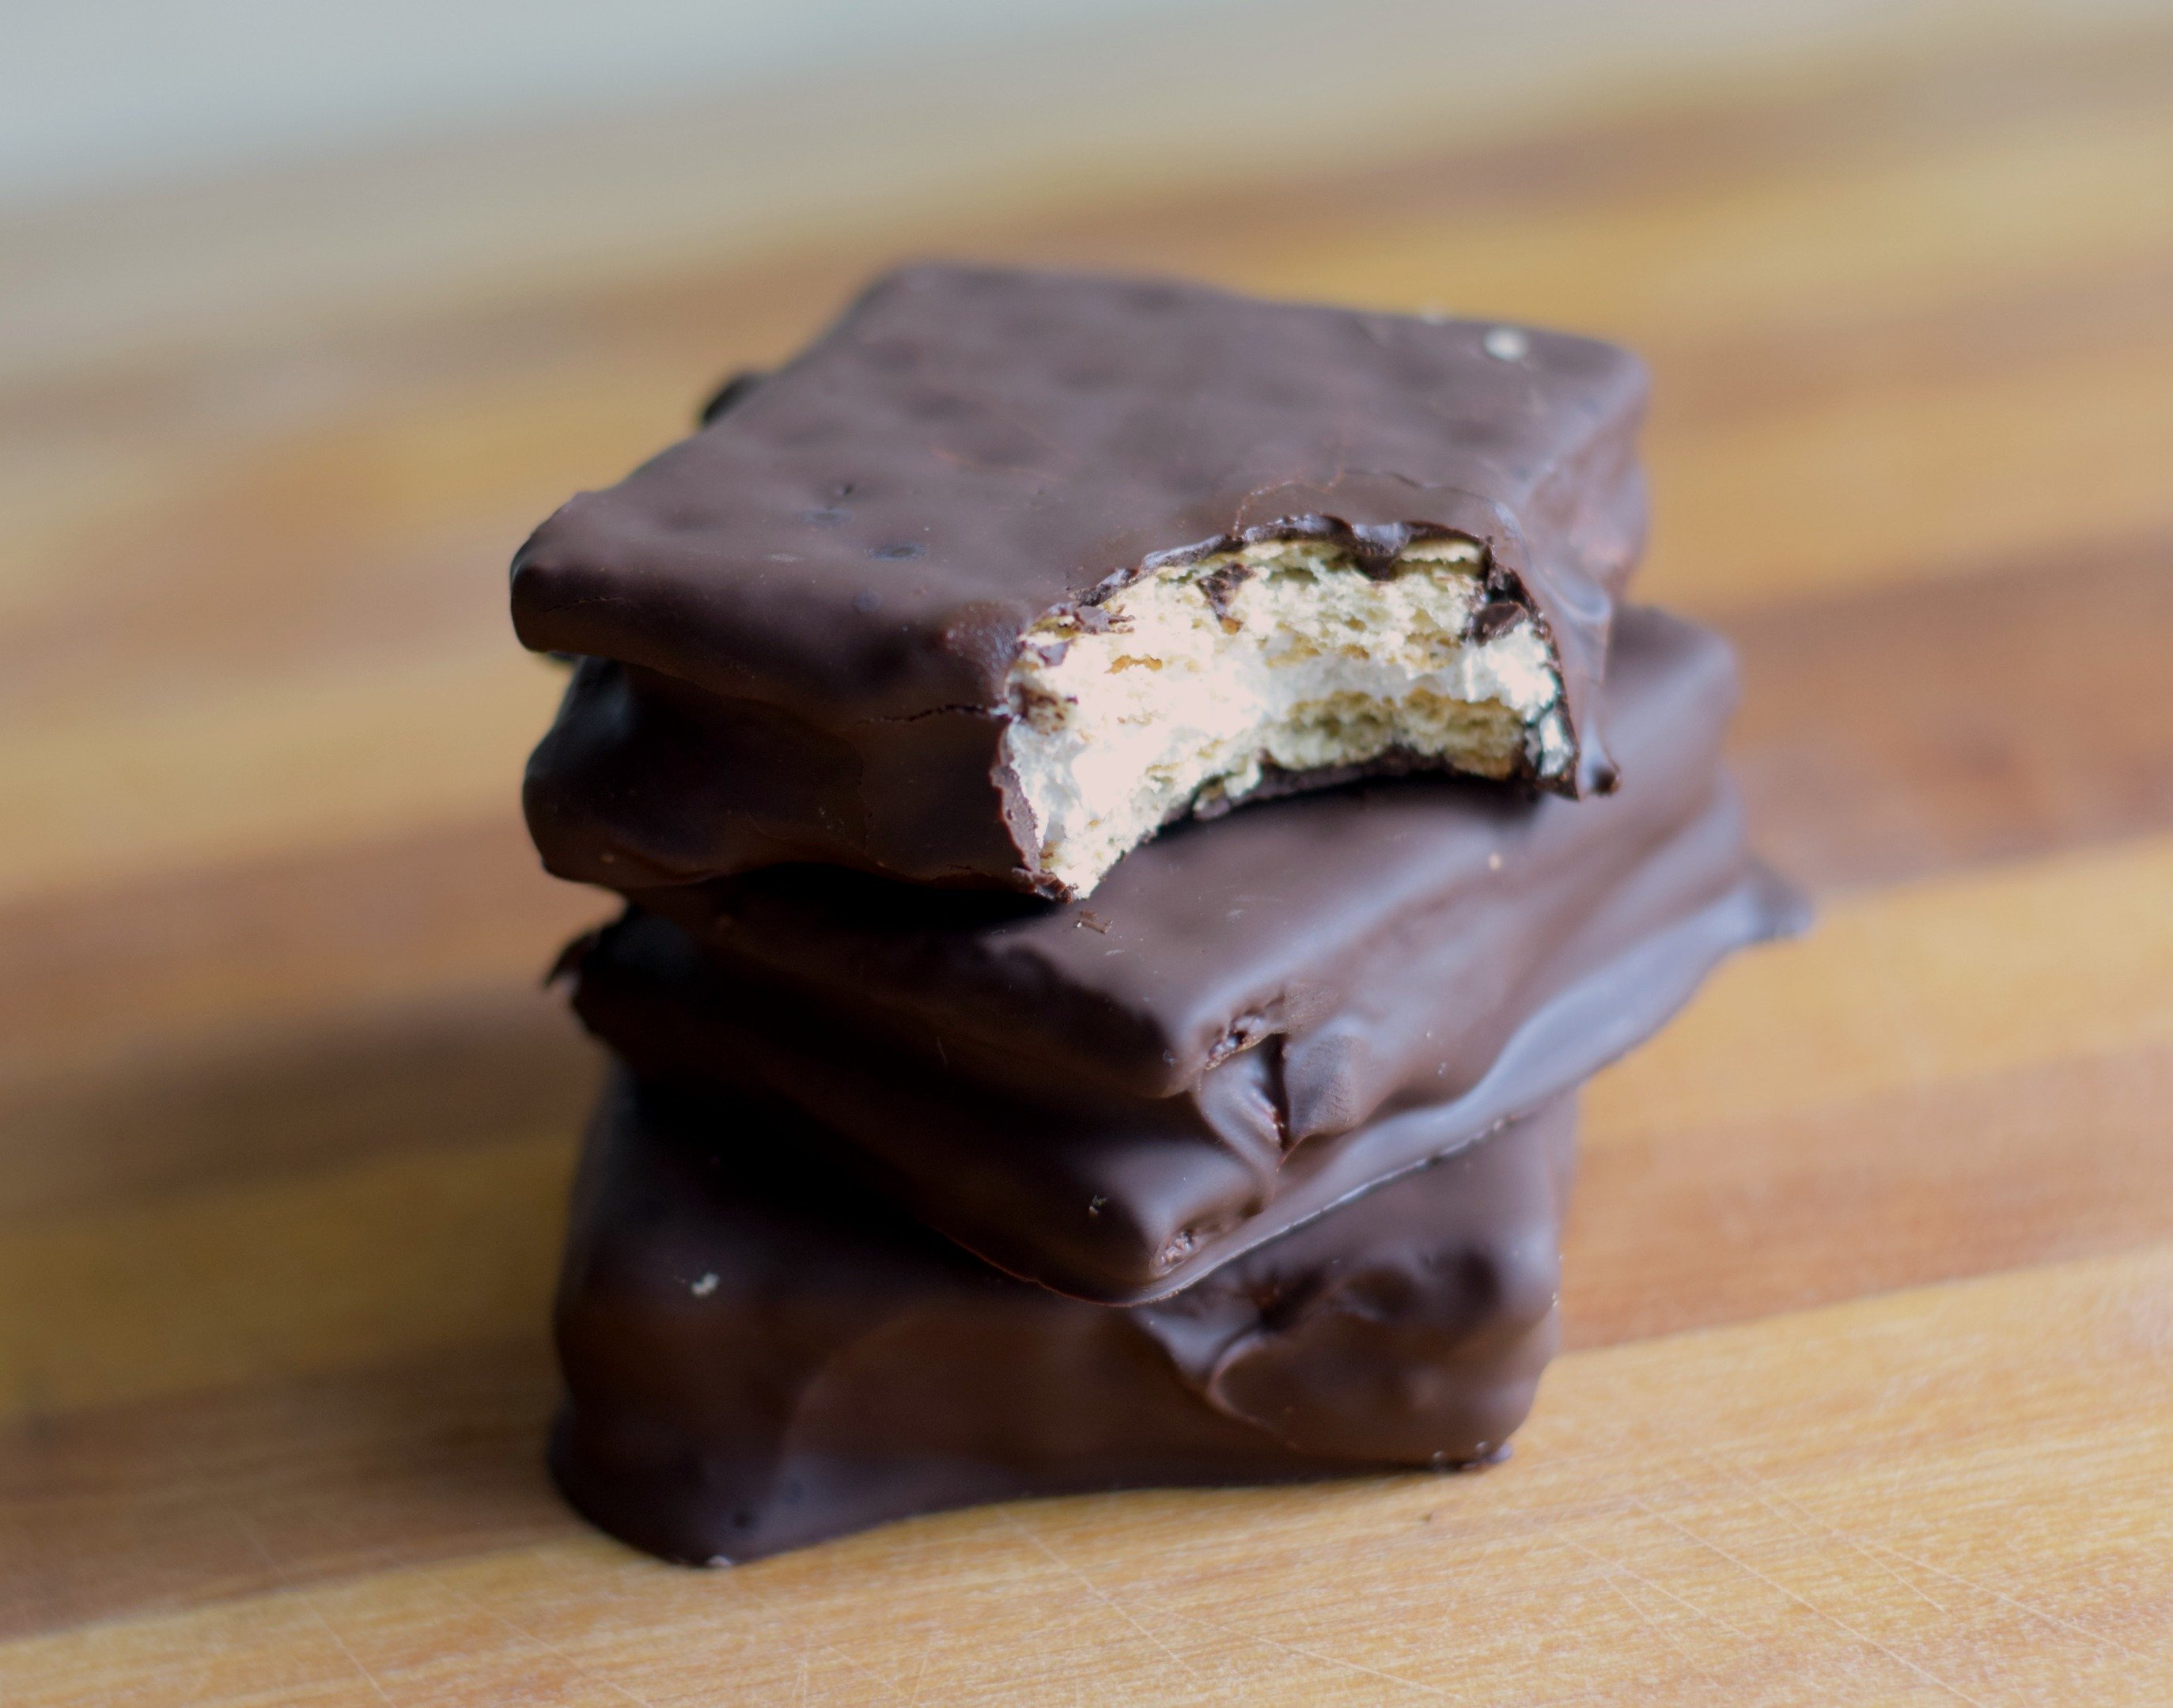 Make your own knockoff girl scout cookies better than their s'mores